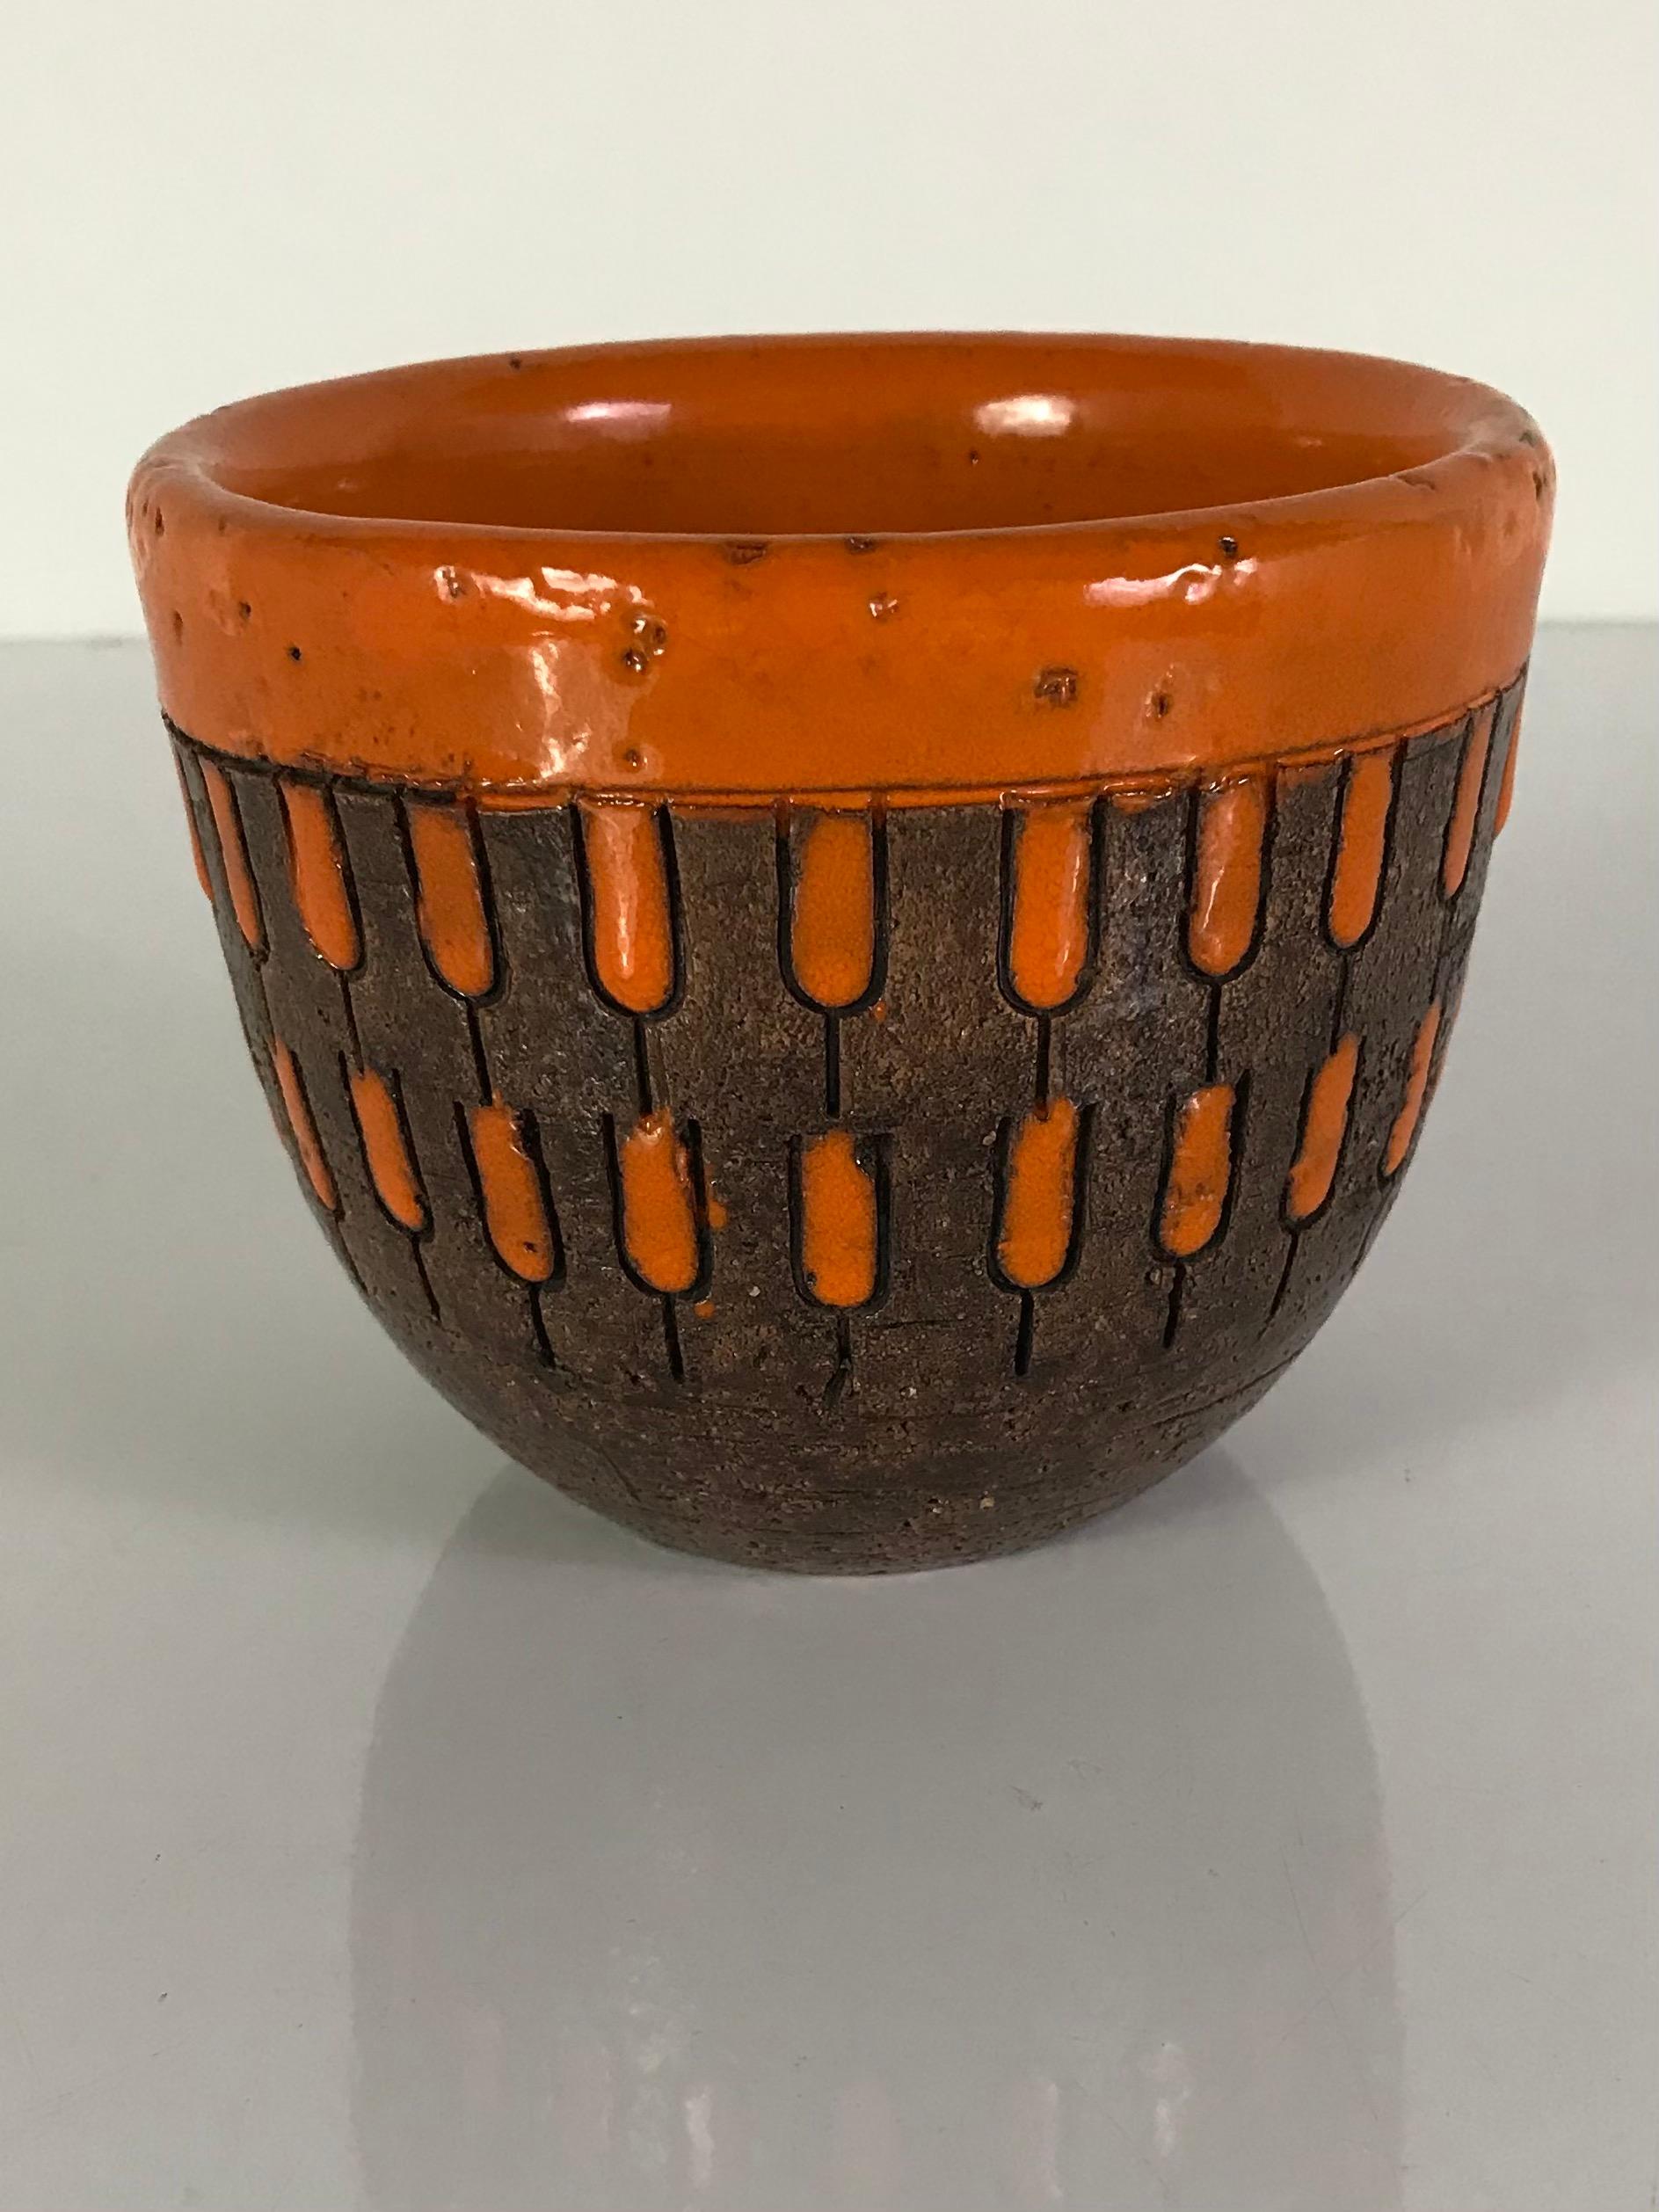 Bright and fun small mid century pottery bowl by Aldo Londi for Bitossi Italy 1960s. Having a glazed rustic finish and high gloss glaze of bright orange on the rim and on the incised design.
In excellent condition with no damage or issues. Stamped